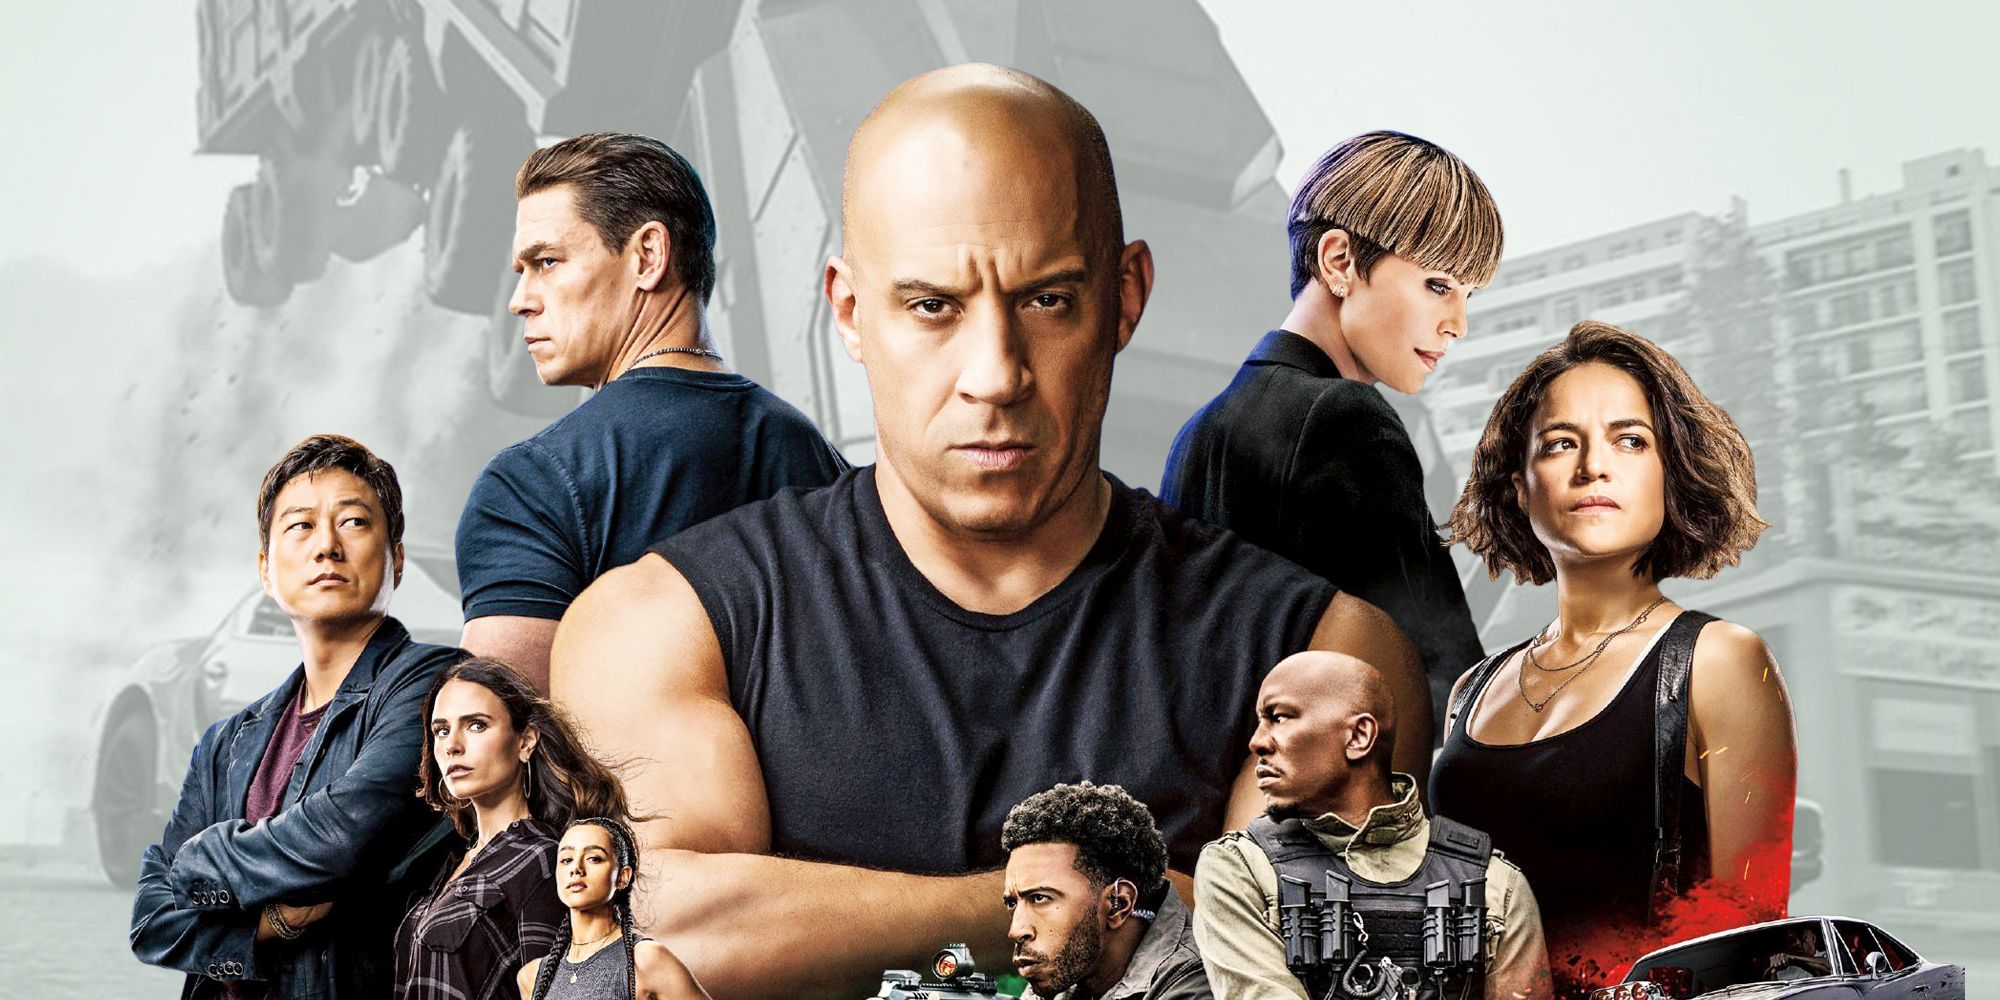 F9' Review from a First-Time 'Fast and Furious' Viewer